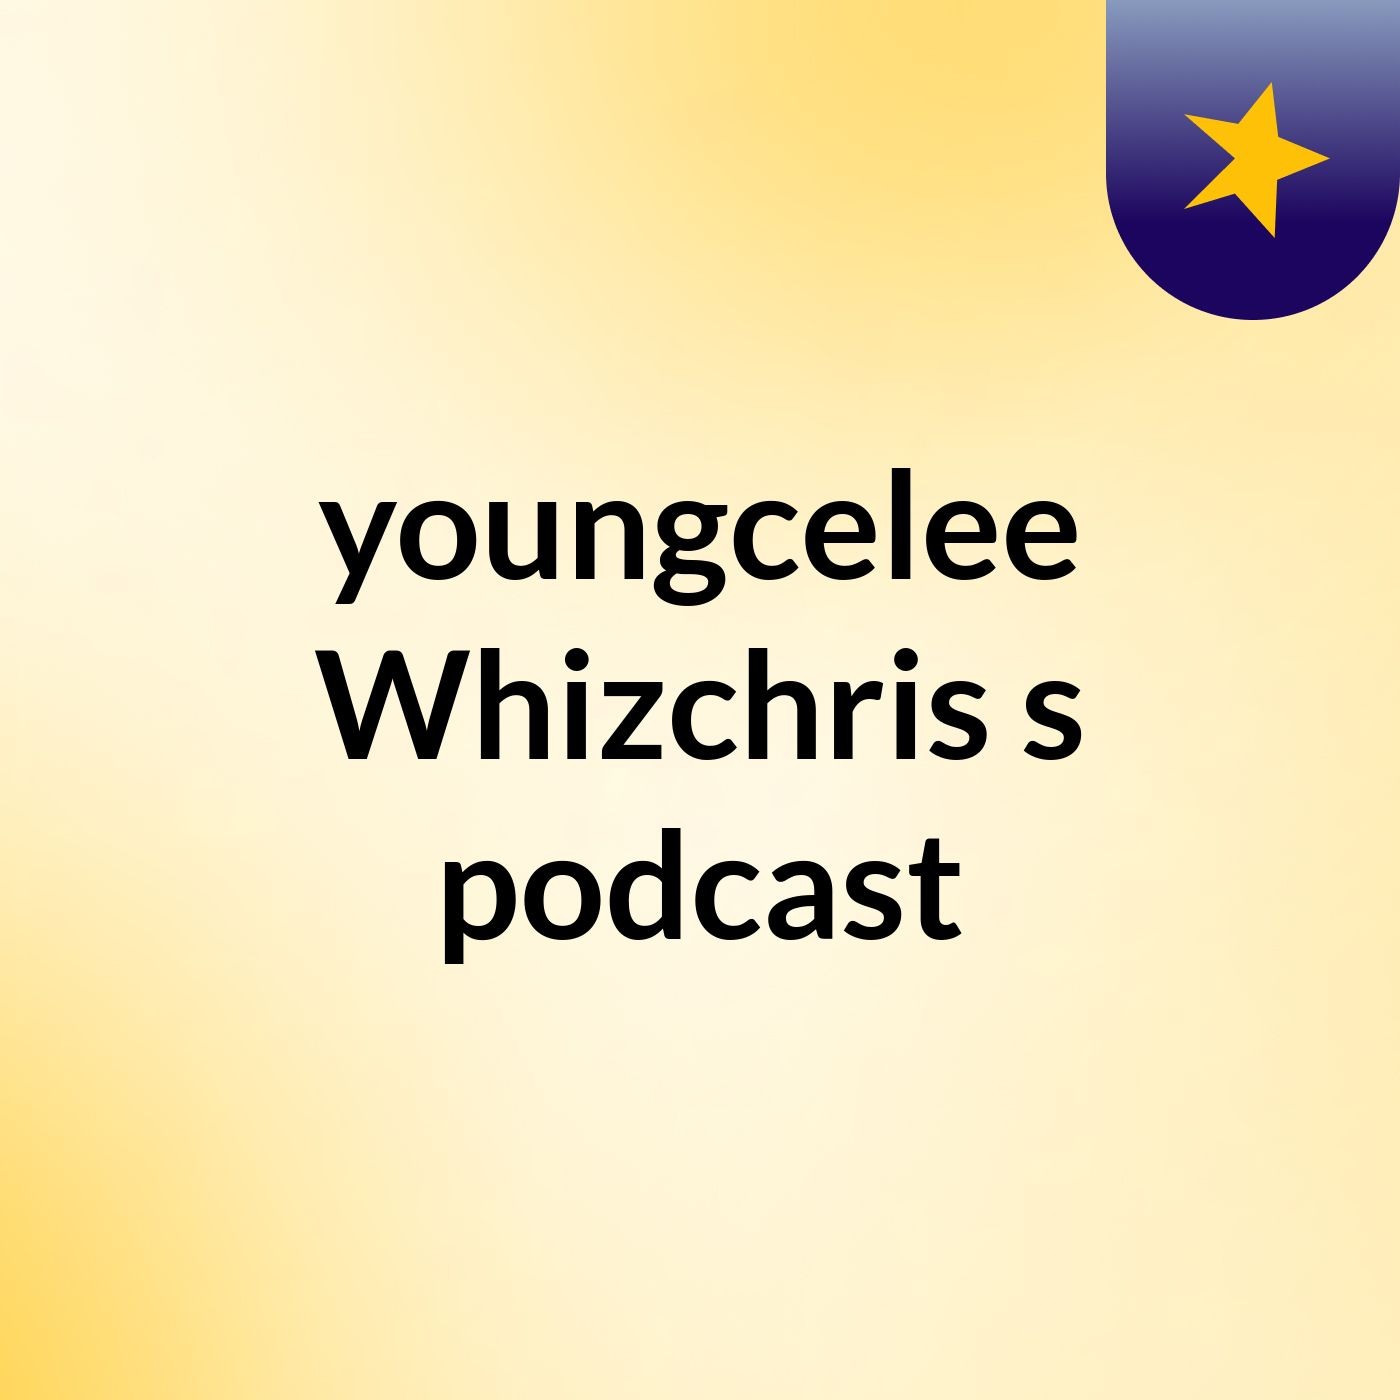 youngcelee Whizchris's podcast